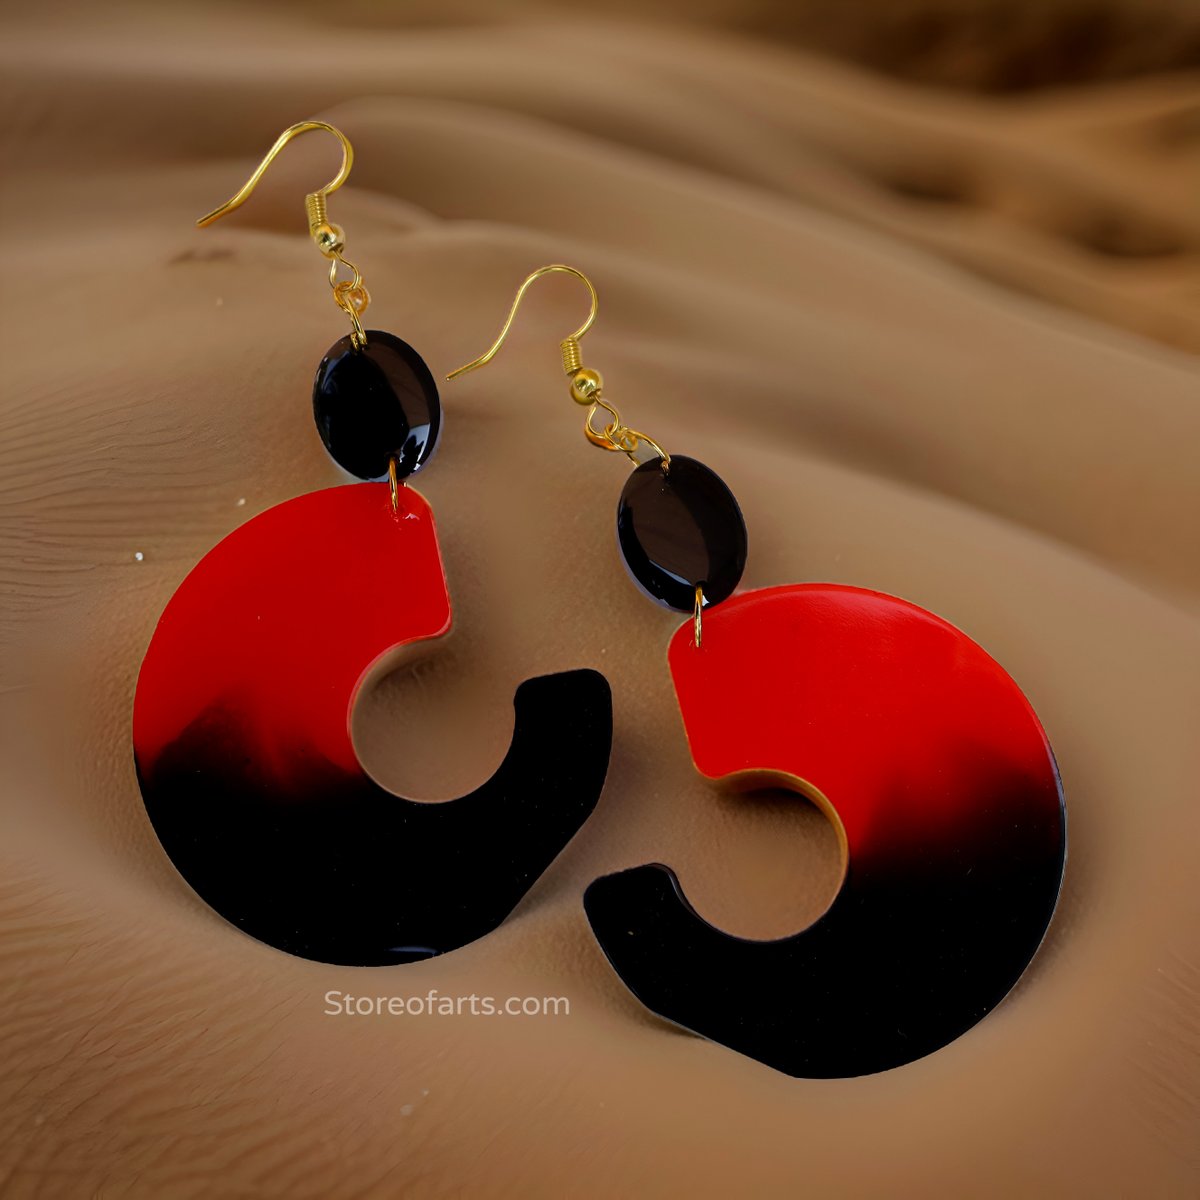 'Elevate your style with our chic Handcrafted Half Hoop Earrings Set! Featuring fiery red & sleek black, these lightweight earrings are perfect for any occasion. 
  ✨ #FashionStatement #HandcraftedJewelry #RedAndBlack #Earrings'
storeofarts.com/products/chic-…